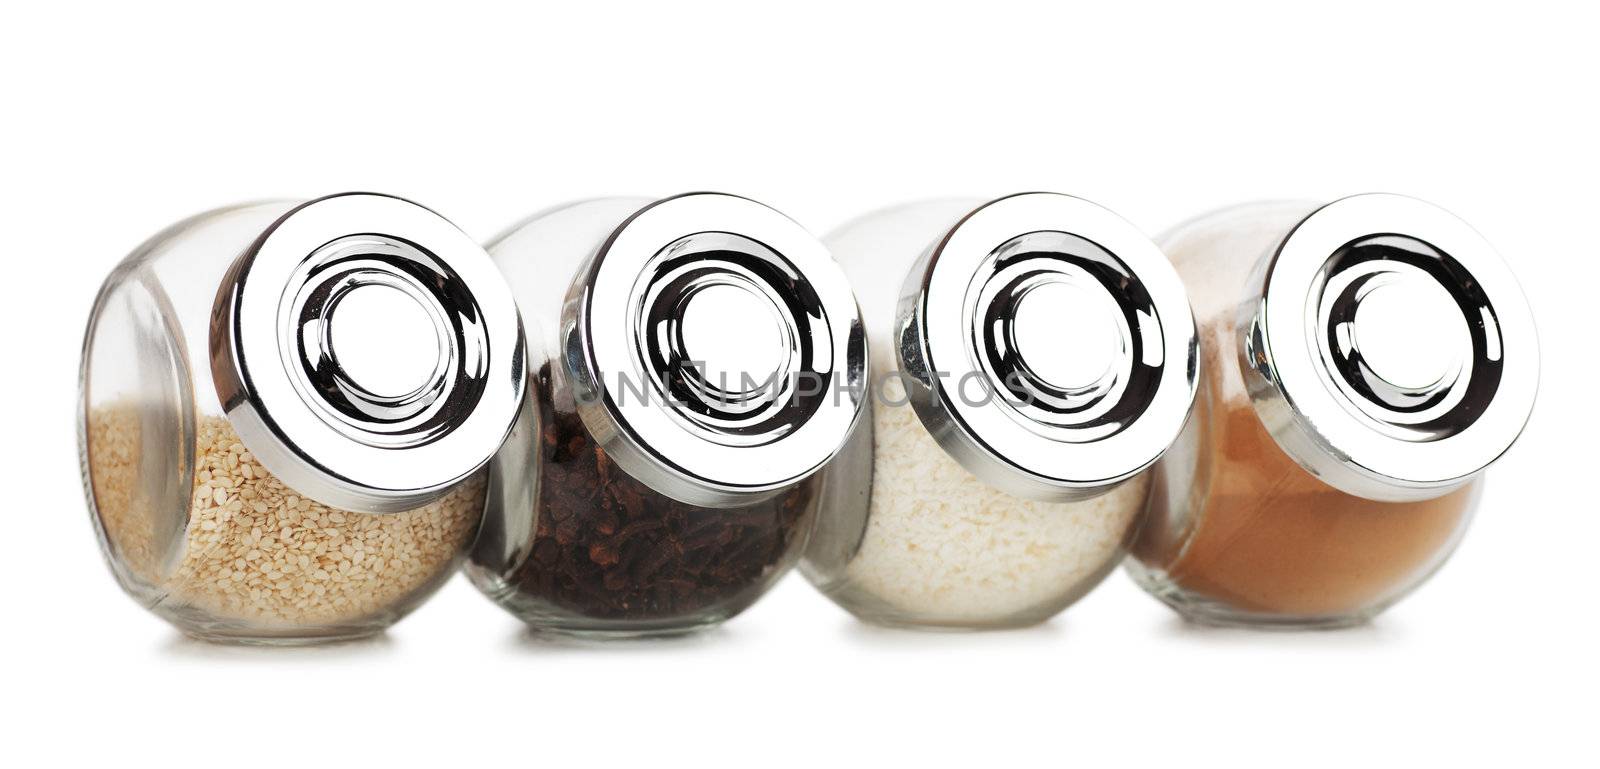 Closeup view of small glass jars with spices